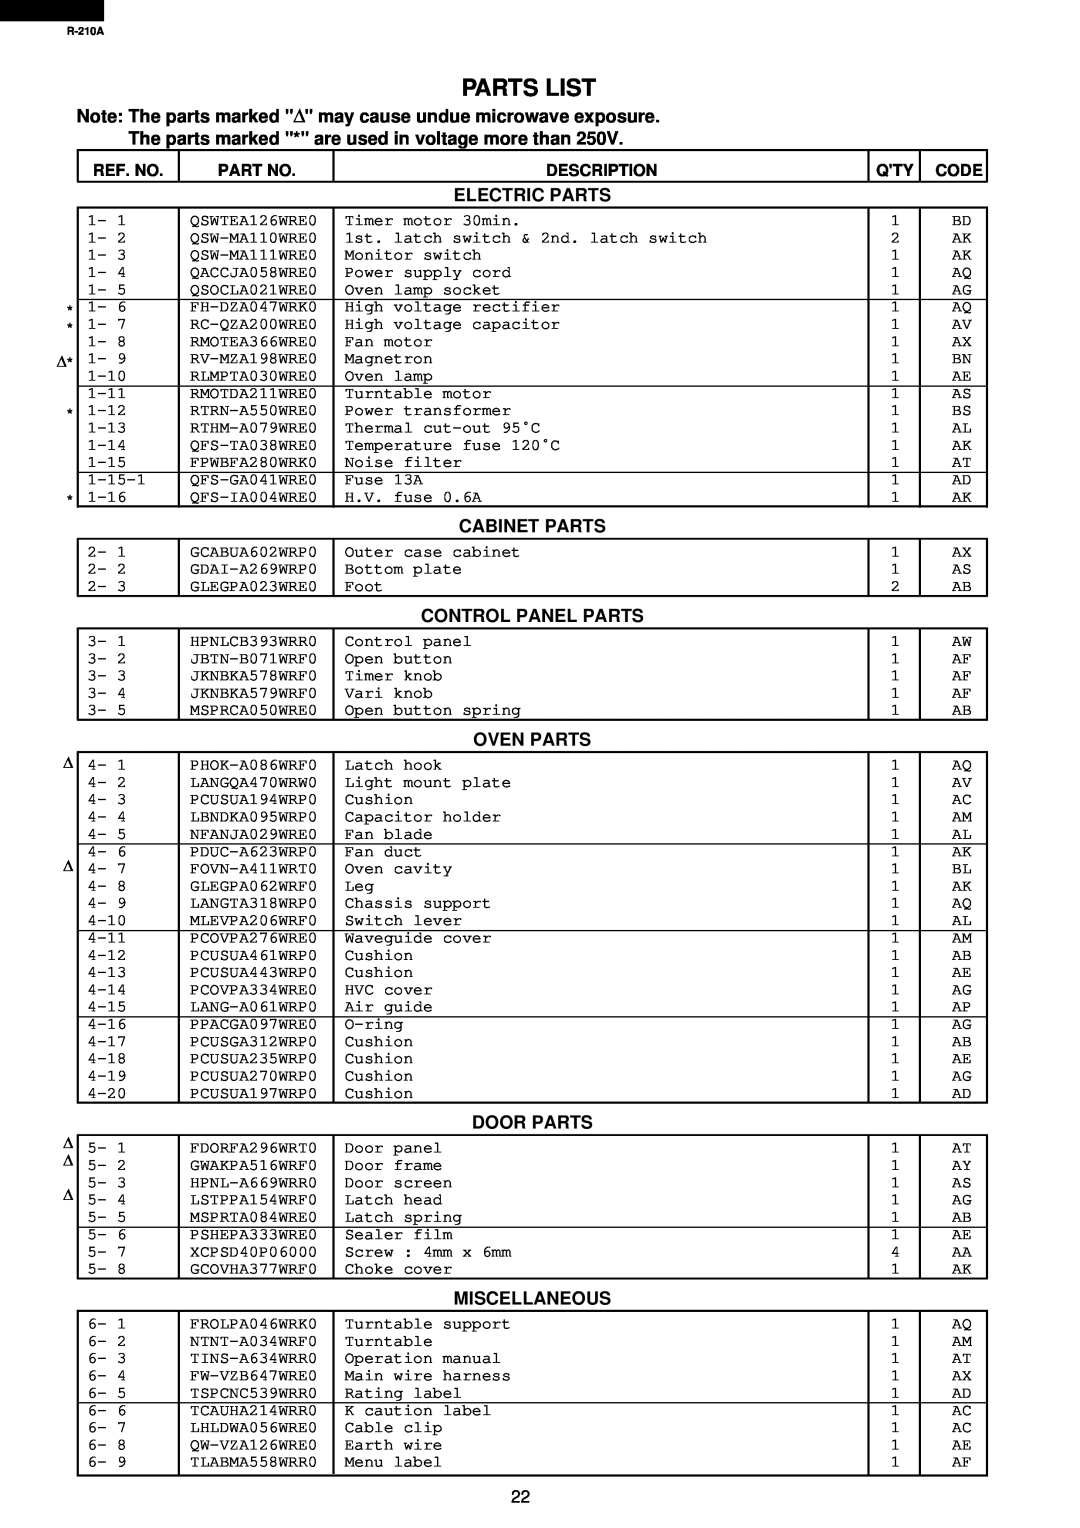 Sharp R-210A Parts List, The parts marked * are used in voltage more than, Electric Parts, Cabinet Parts, Oven Parts 